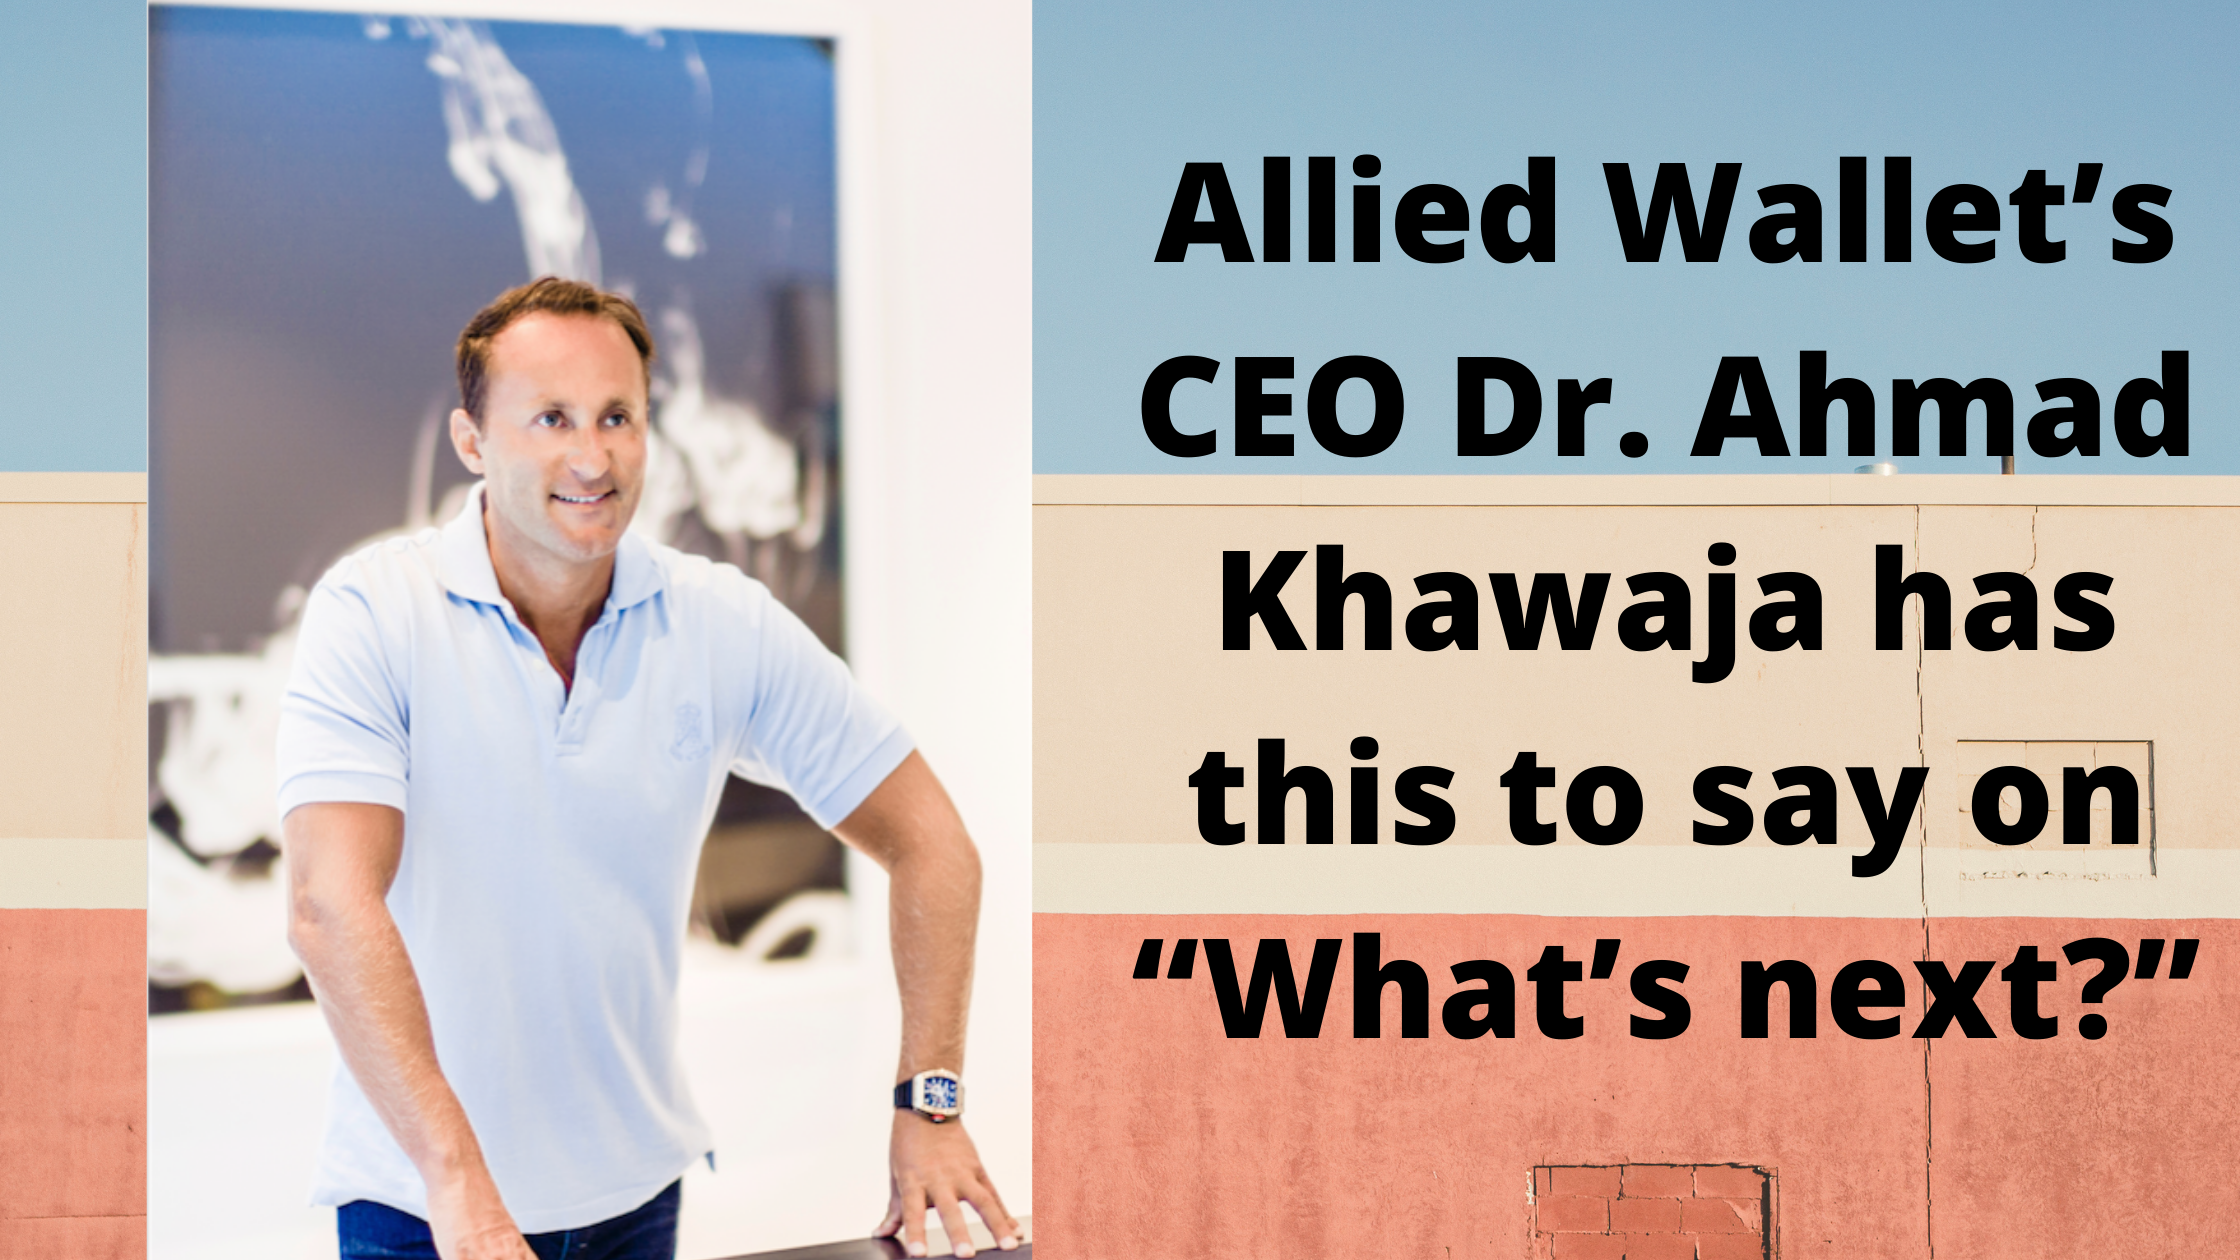 Allied Wallet’s CEO Dr. Andy Khawaja has this to say on “What’s next?”